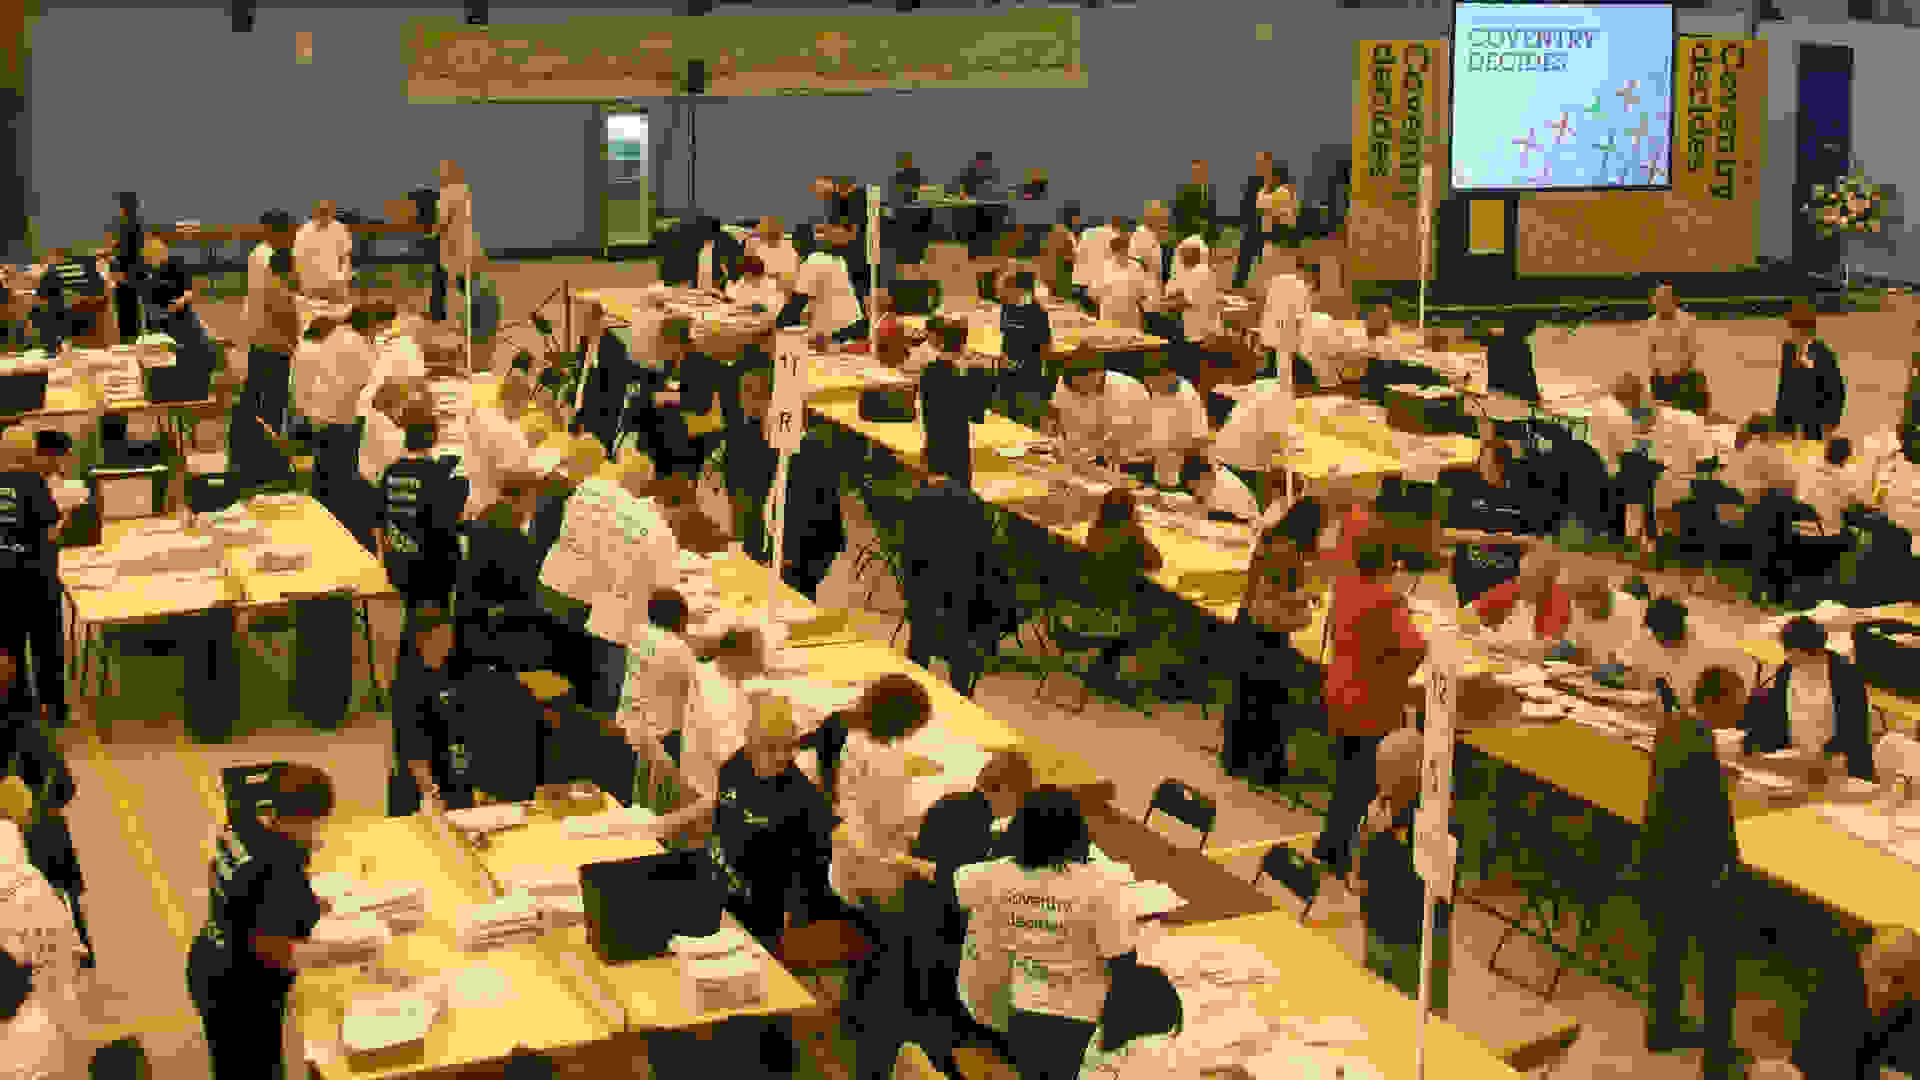 Votes are counted in Coventry during the 2010 General Election. ©Coventry City Council / CC BY-NC-ND 2.0 Deed